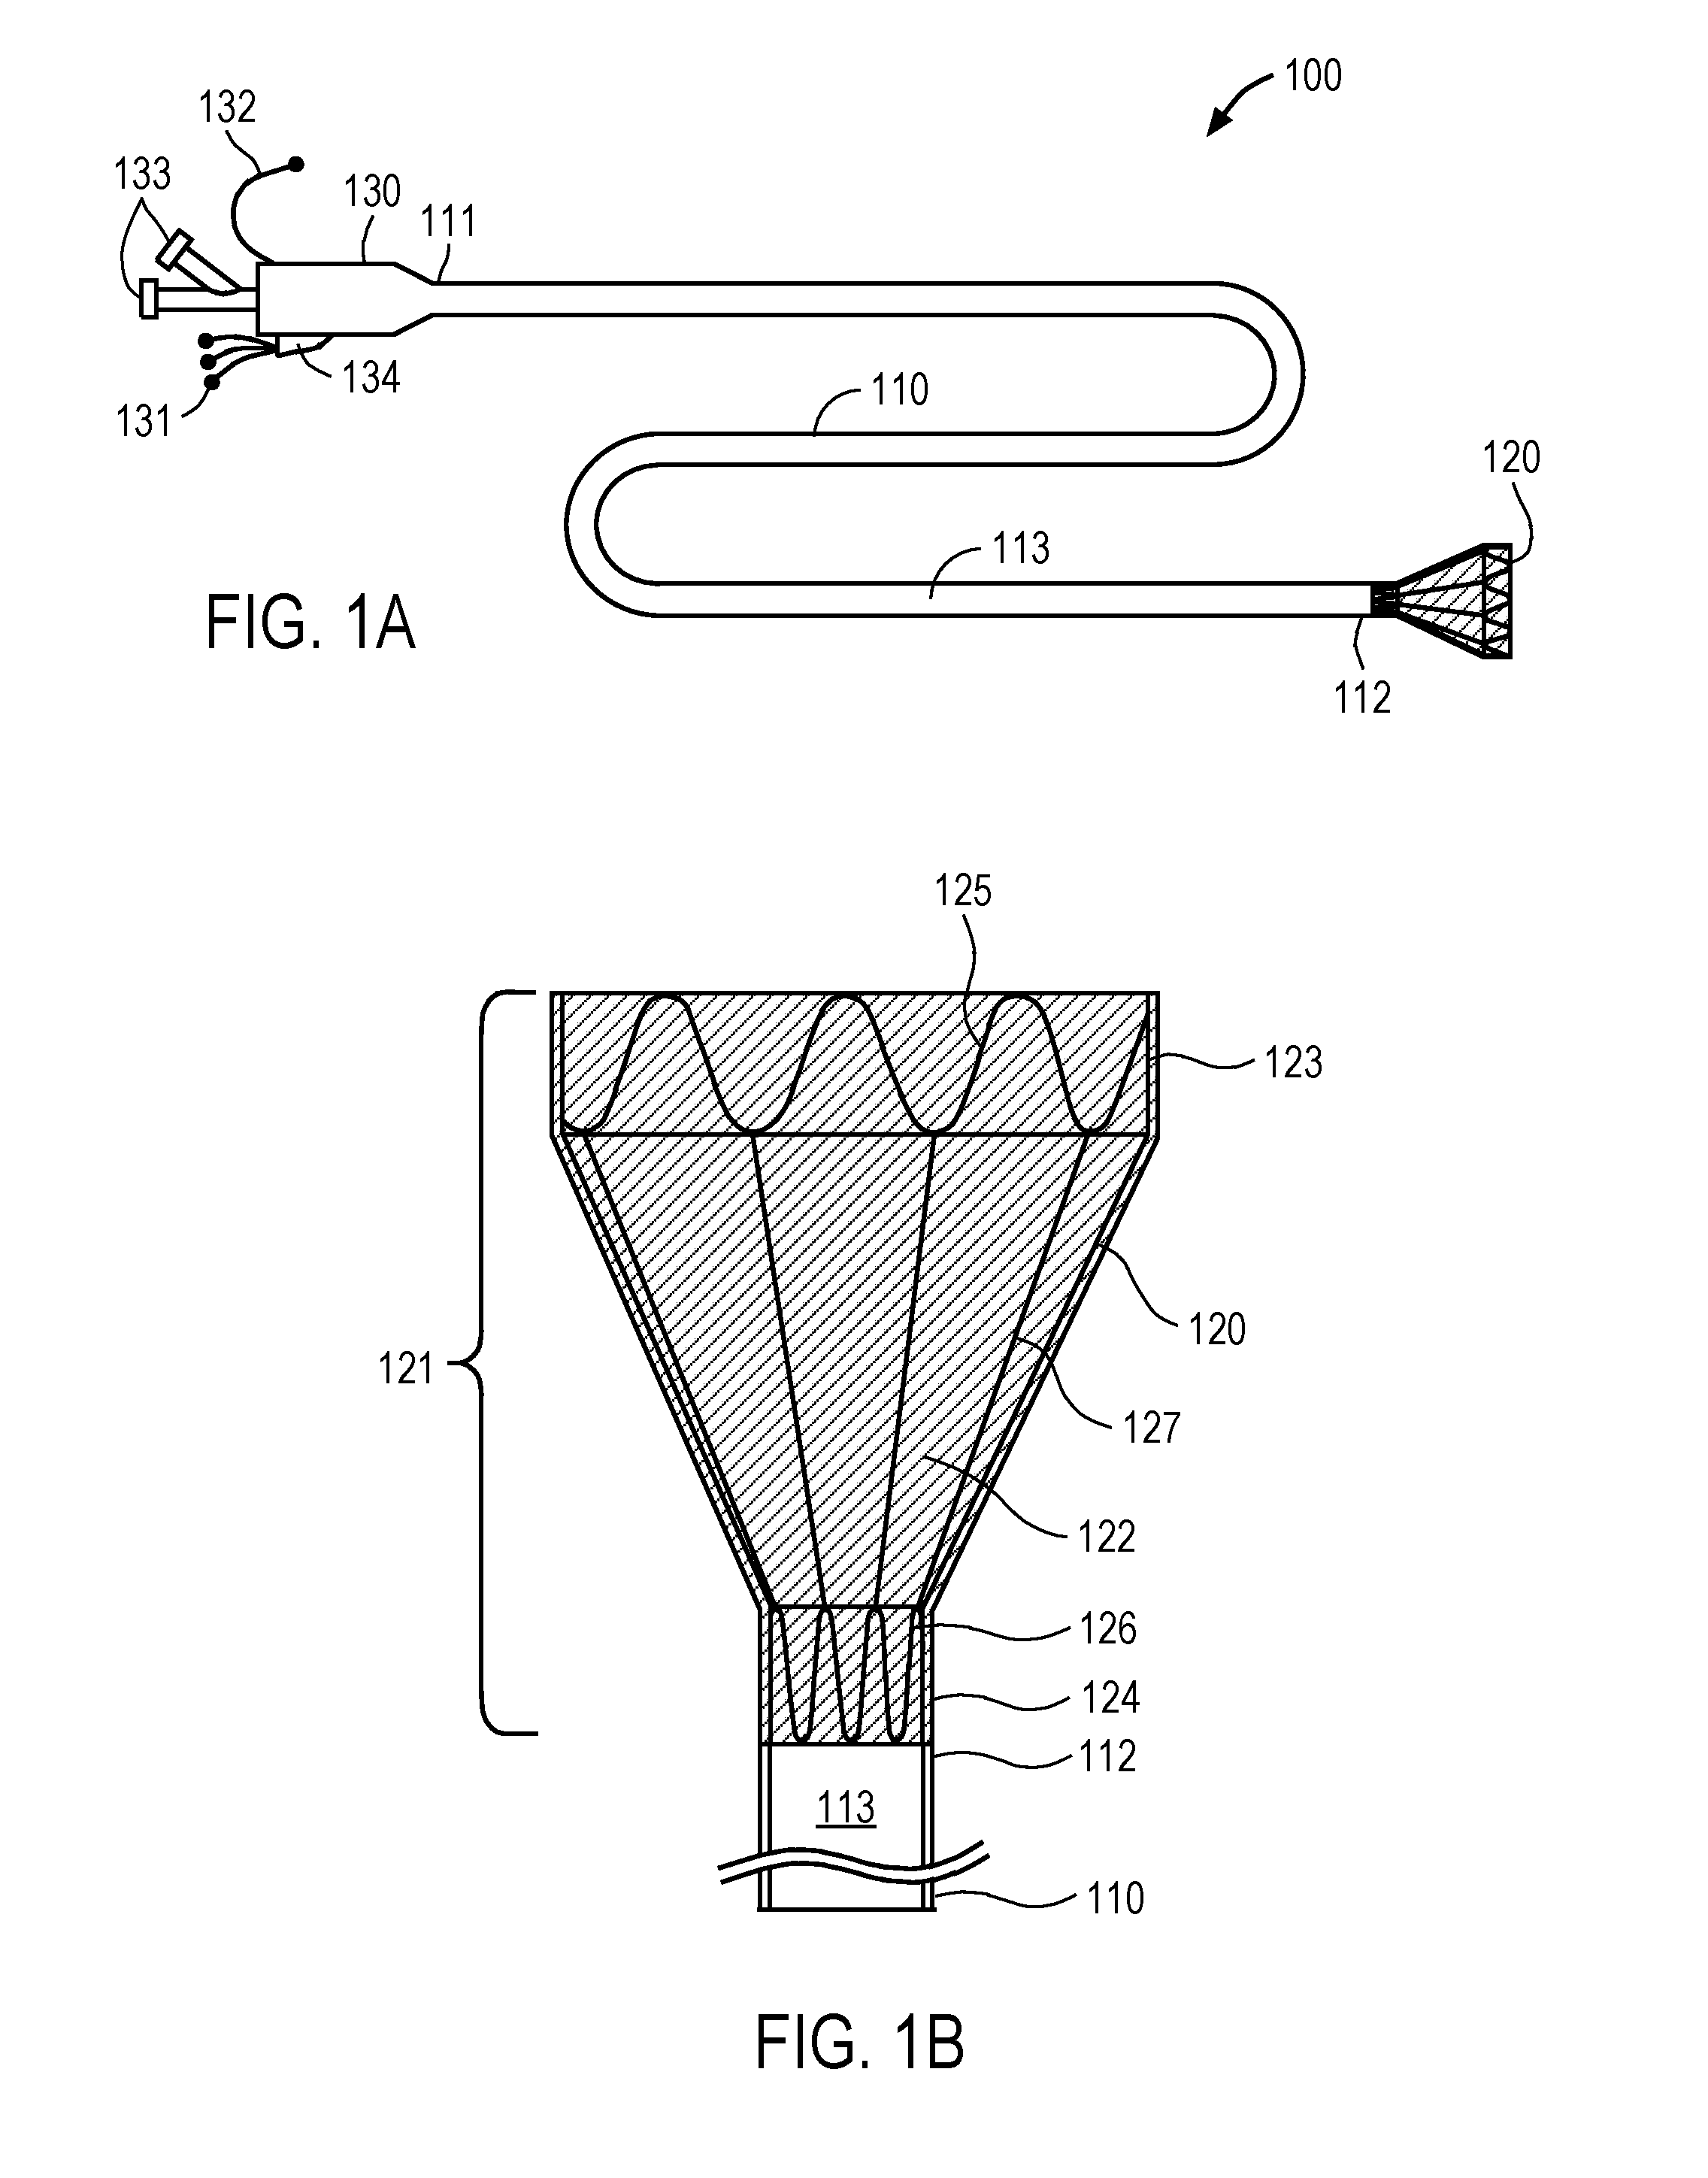 Apparatus and methods for filtering emboli during precutaneous aortic valve replacement and repair procedures with filtration system coupled to distal end of sheath